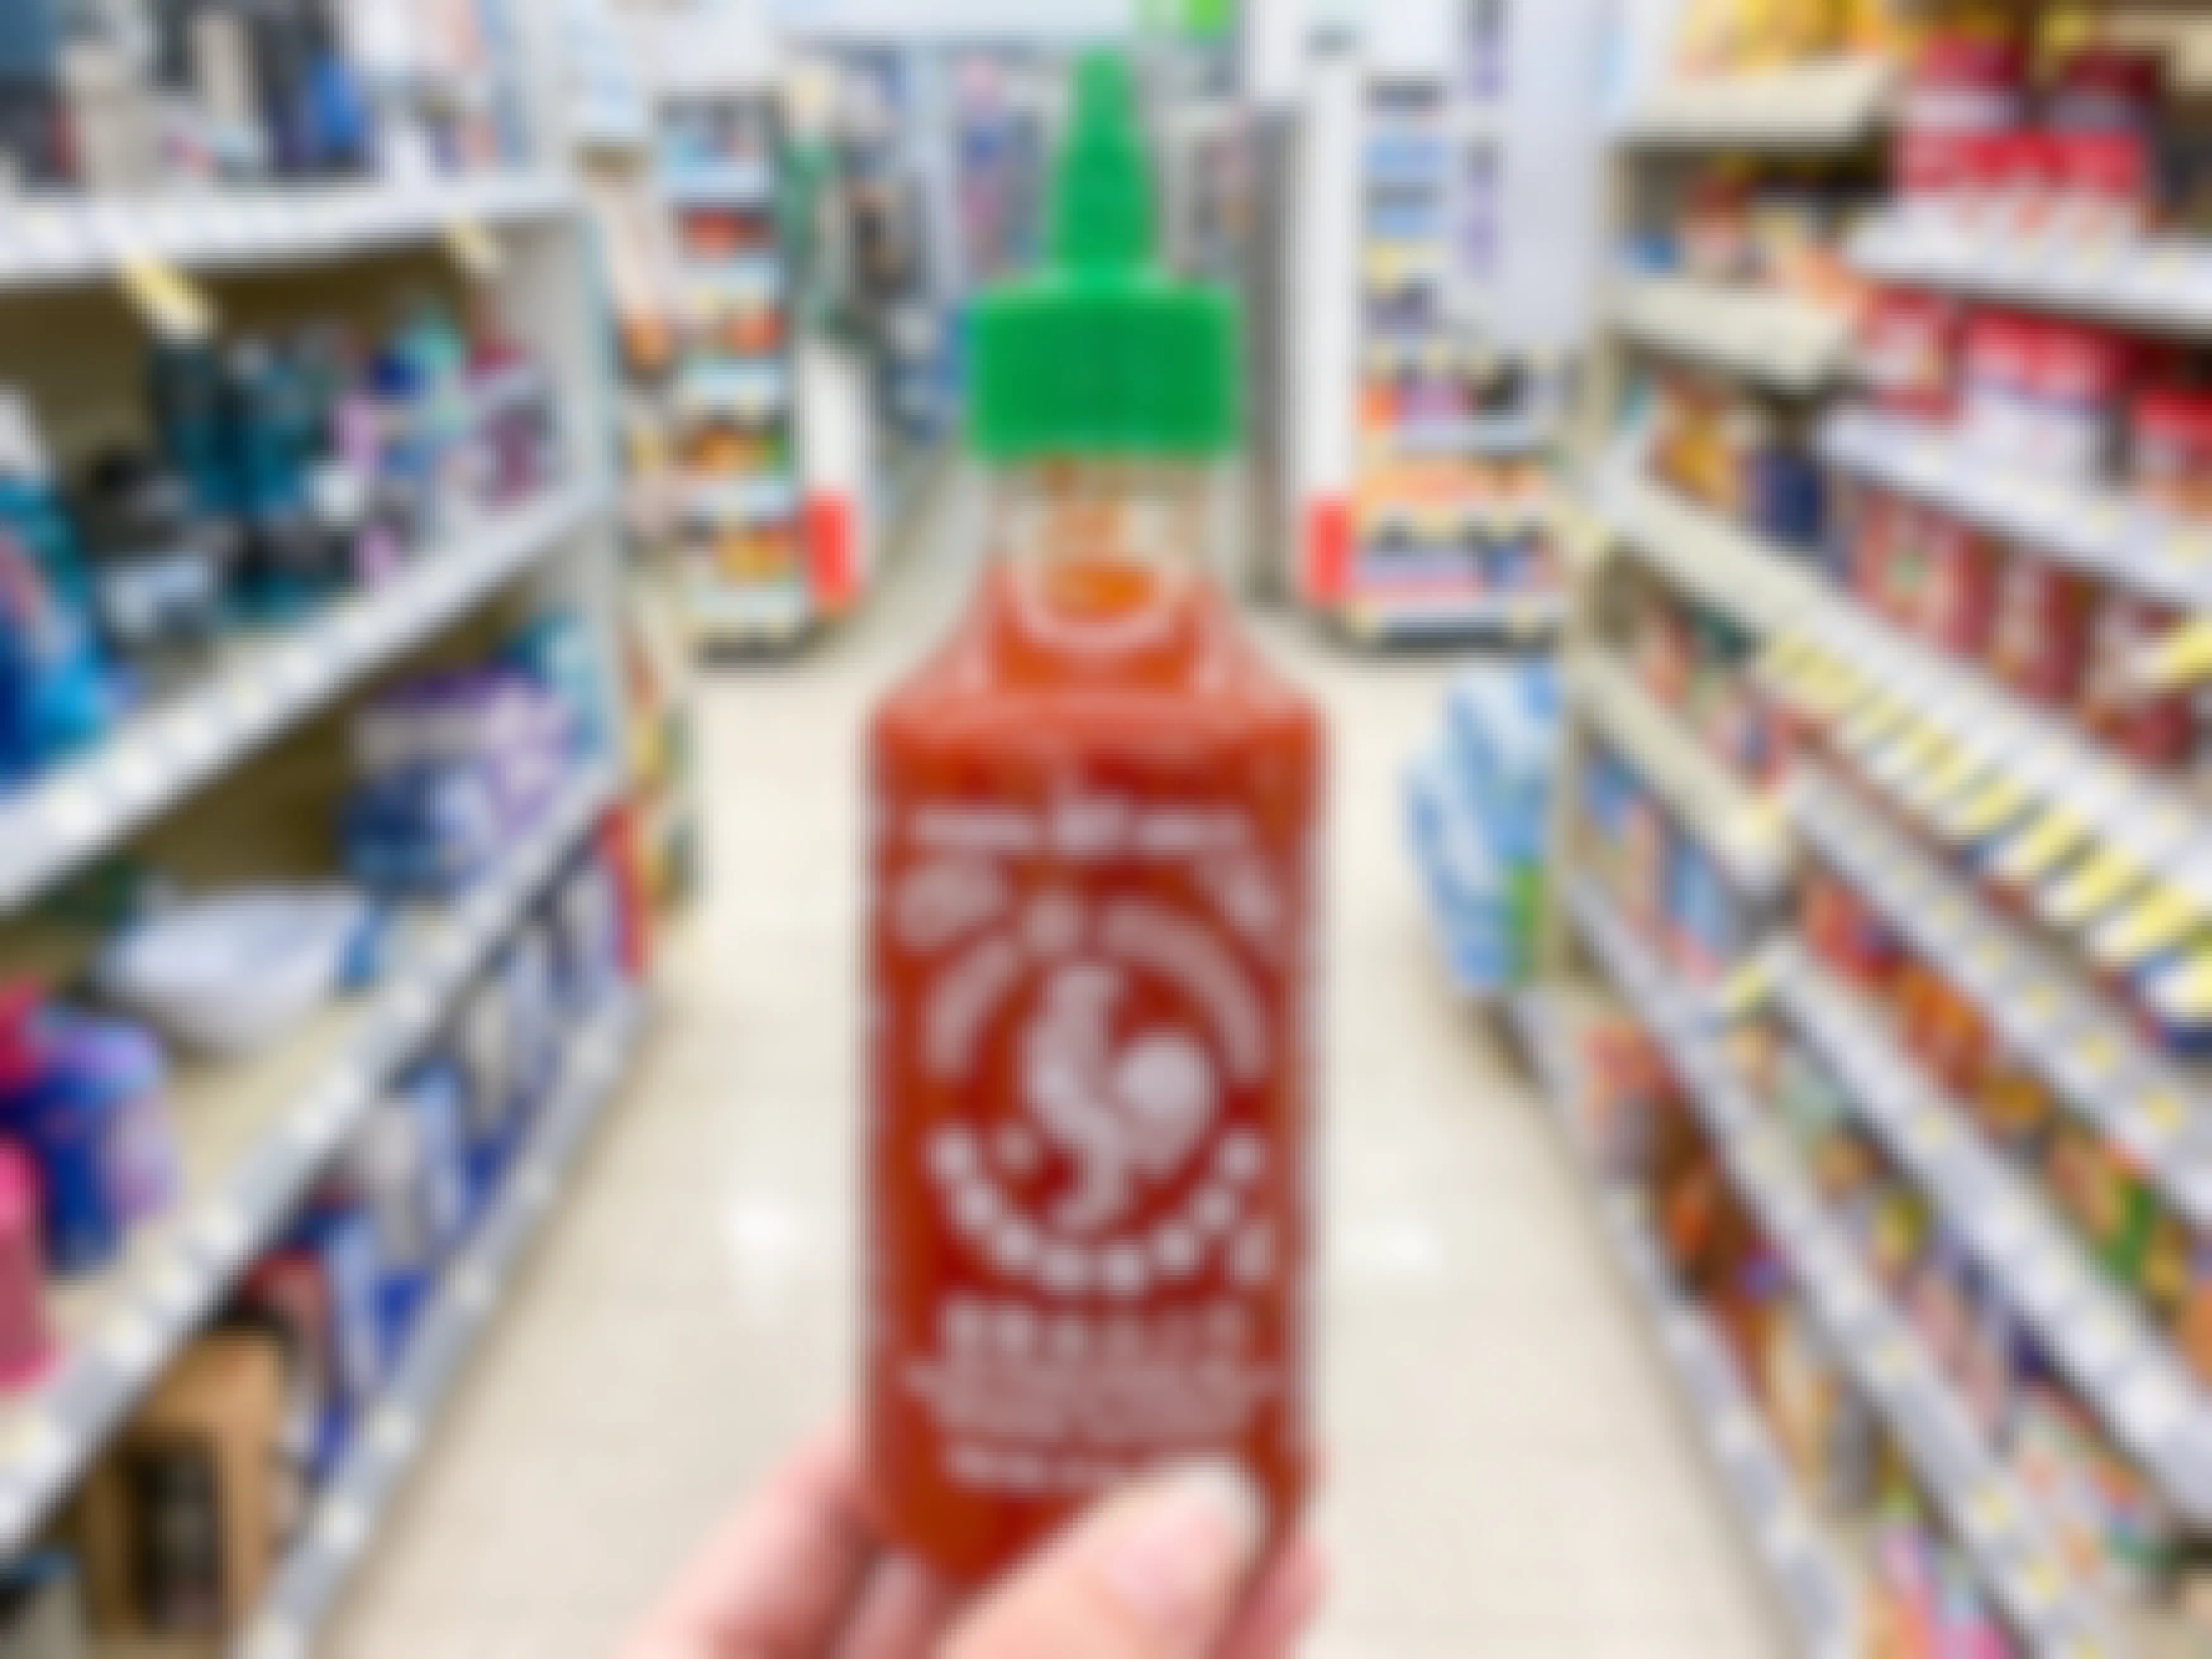 A person's hand holding up a bottle of Sriracha in an aisle at Walgreens.